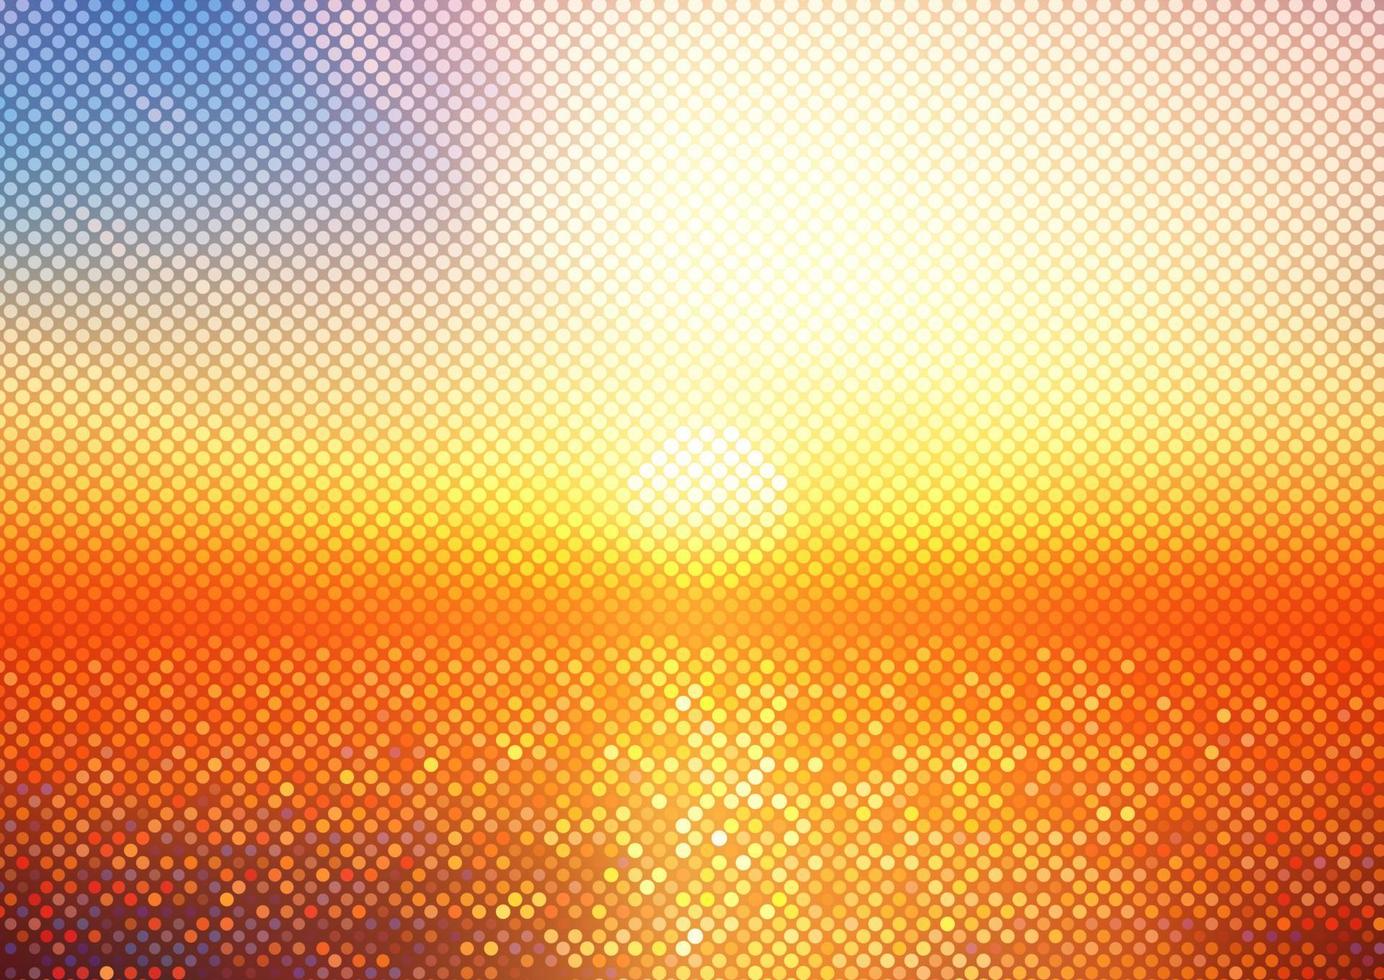 abstract sunset landscape with halftone dots design vector